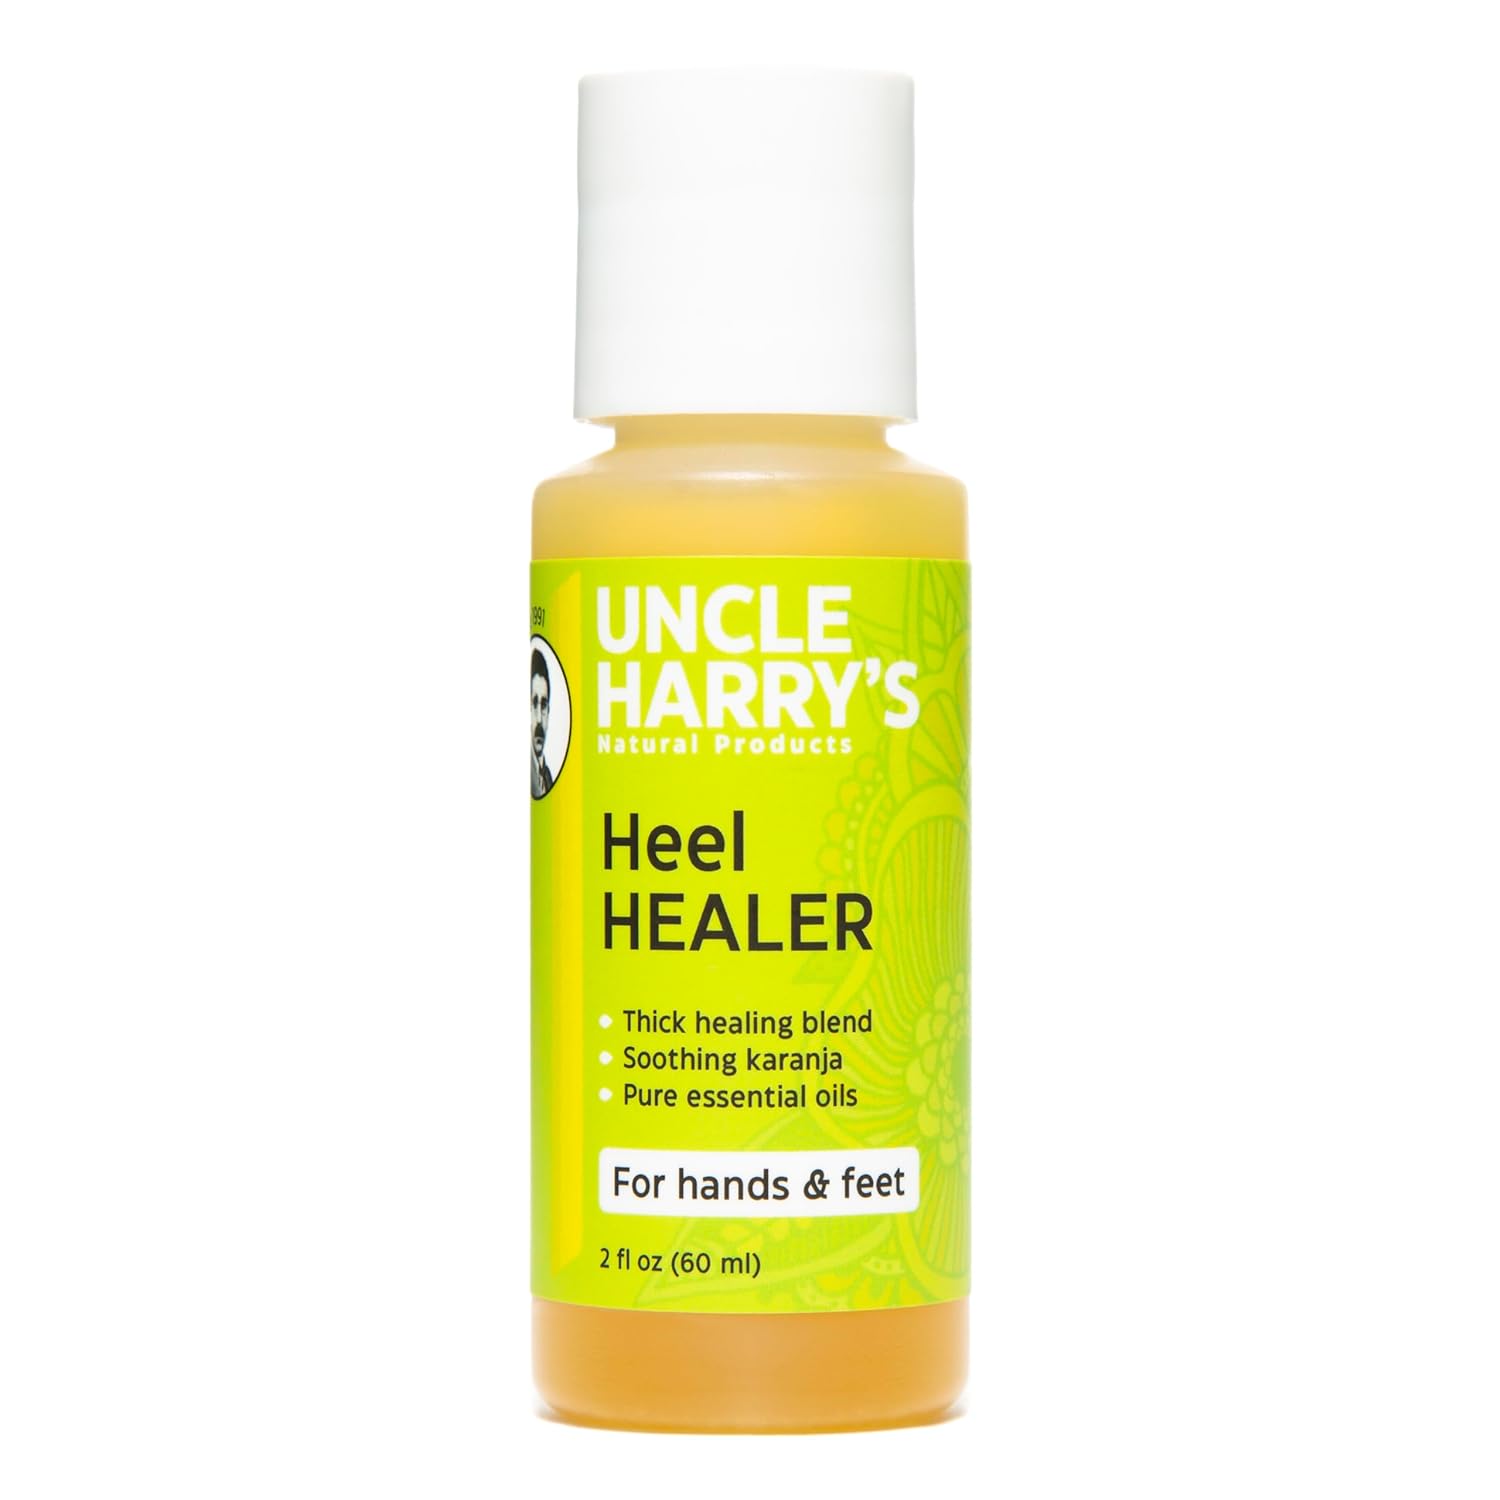 Uncle Harry's All Natural Heel Healer Foot Oil | Foot Repair Dry Feet Treatment with Castor Oil | Liquid Heel Balm & Foot Softener | Self Care Products for Cracked Heel, Cuticle Care & Foot Callus